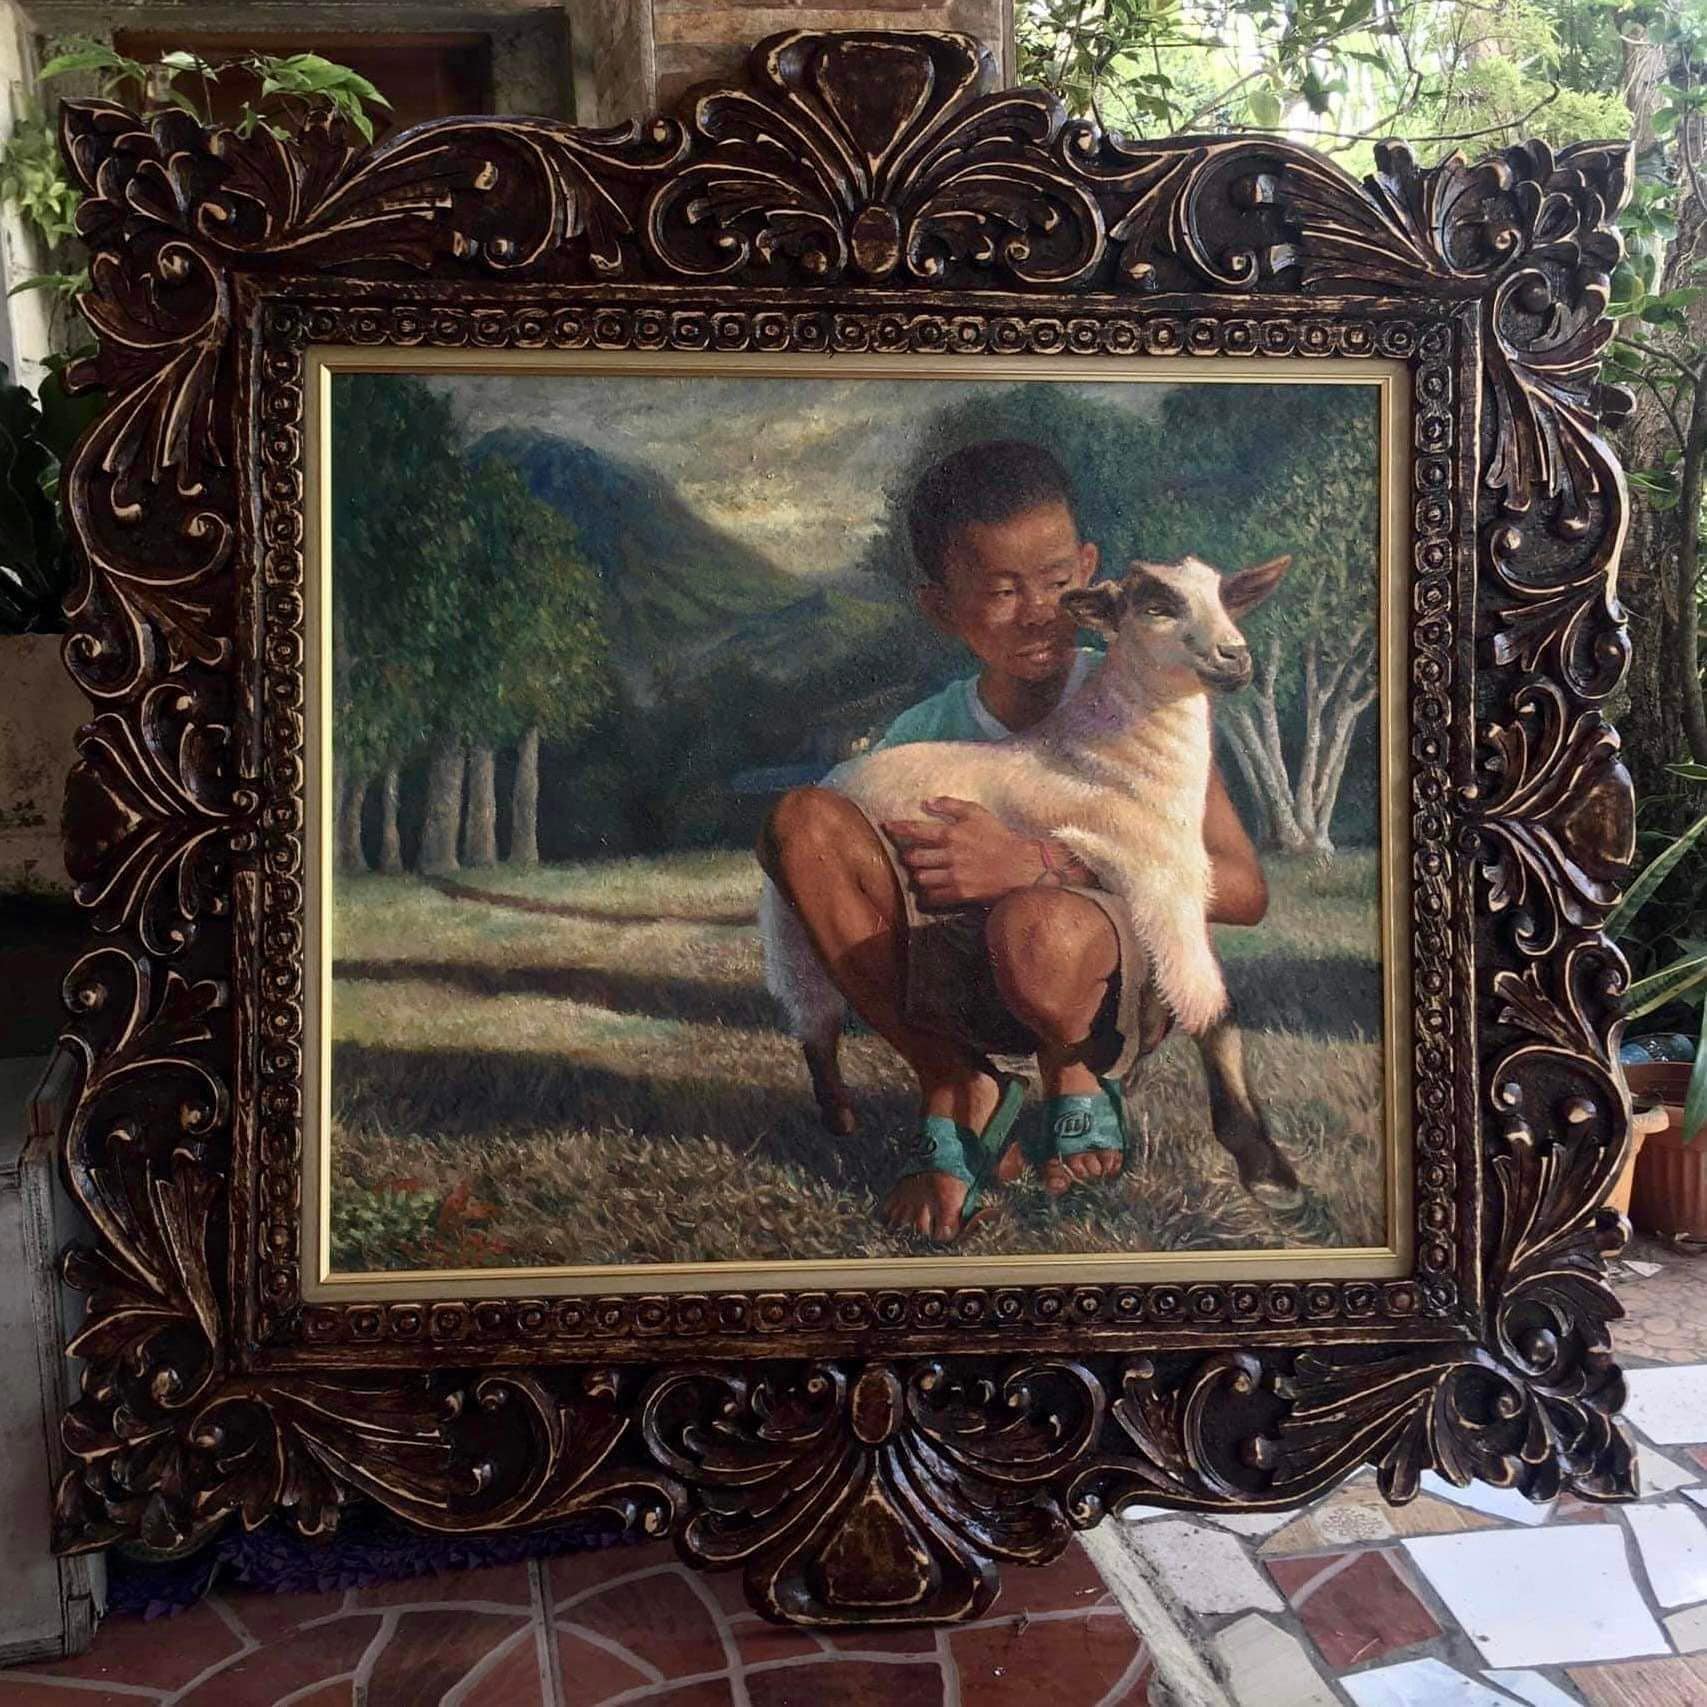 Another Bukid Life painting of Elvin Vitor. Photo by Elvin Vitor.